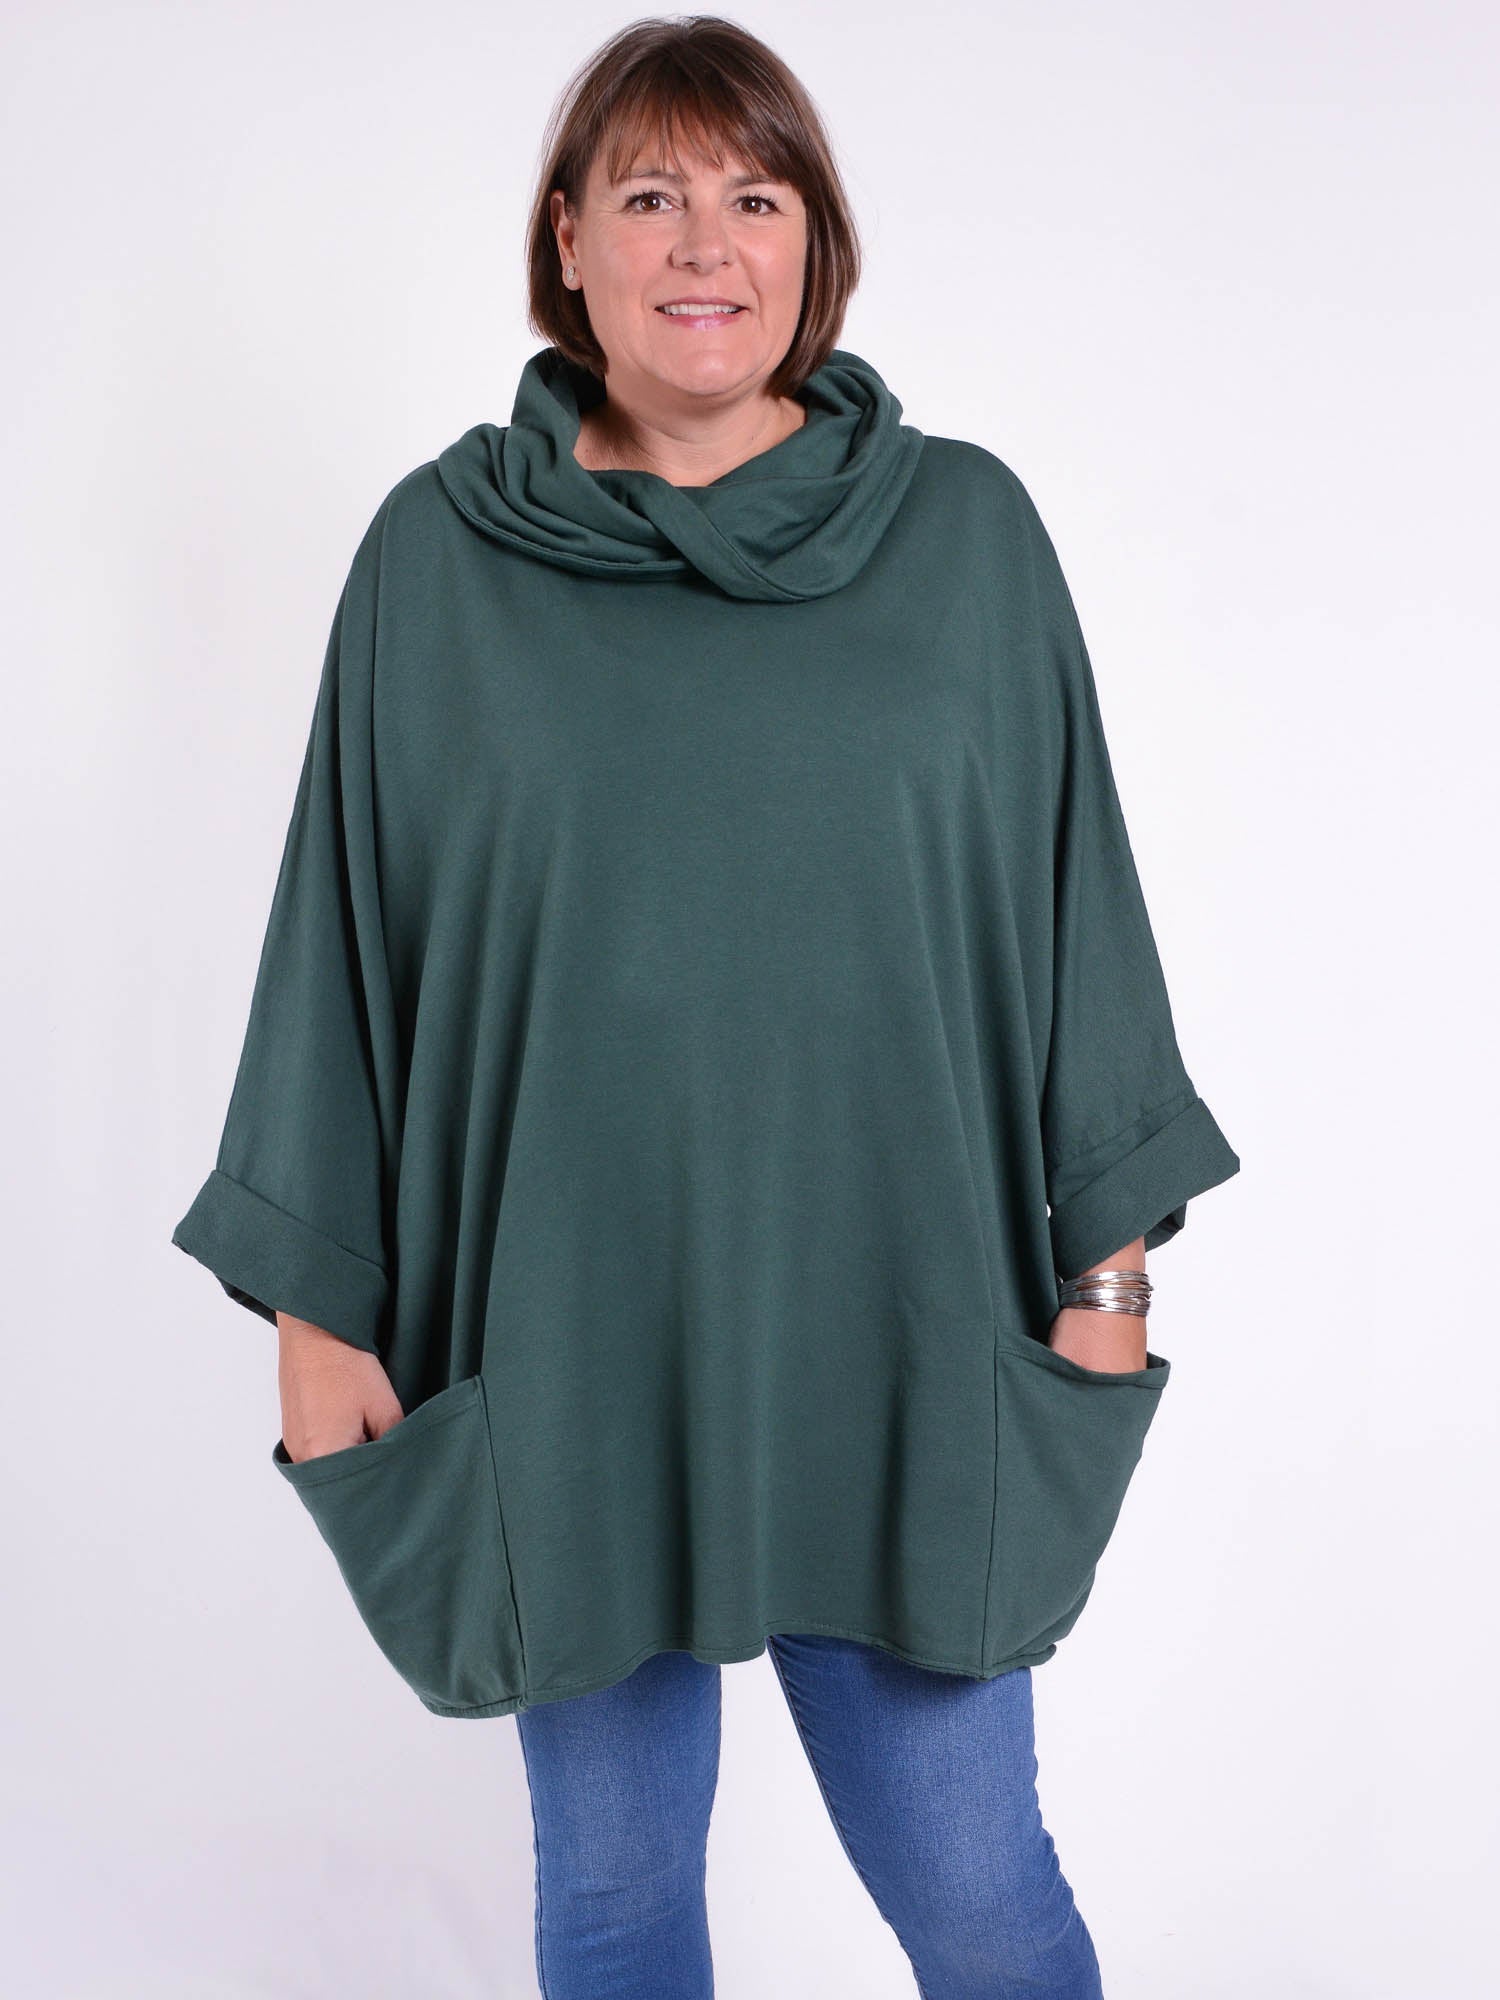 Cotton Cowl Neck Long Length Tunic - 9822, Tops & Shirts, Pure Plus Clothing, Pure Plus Clothing, Lagenlook Clothing, Pure Plus